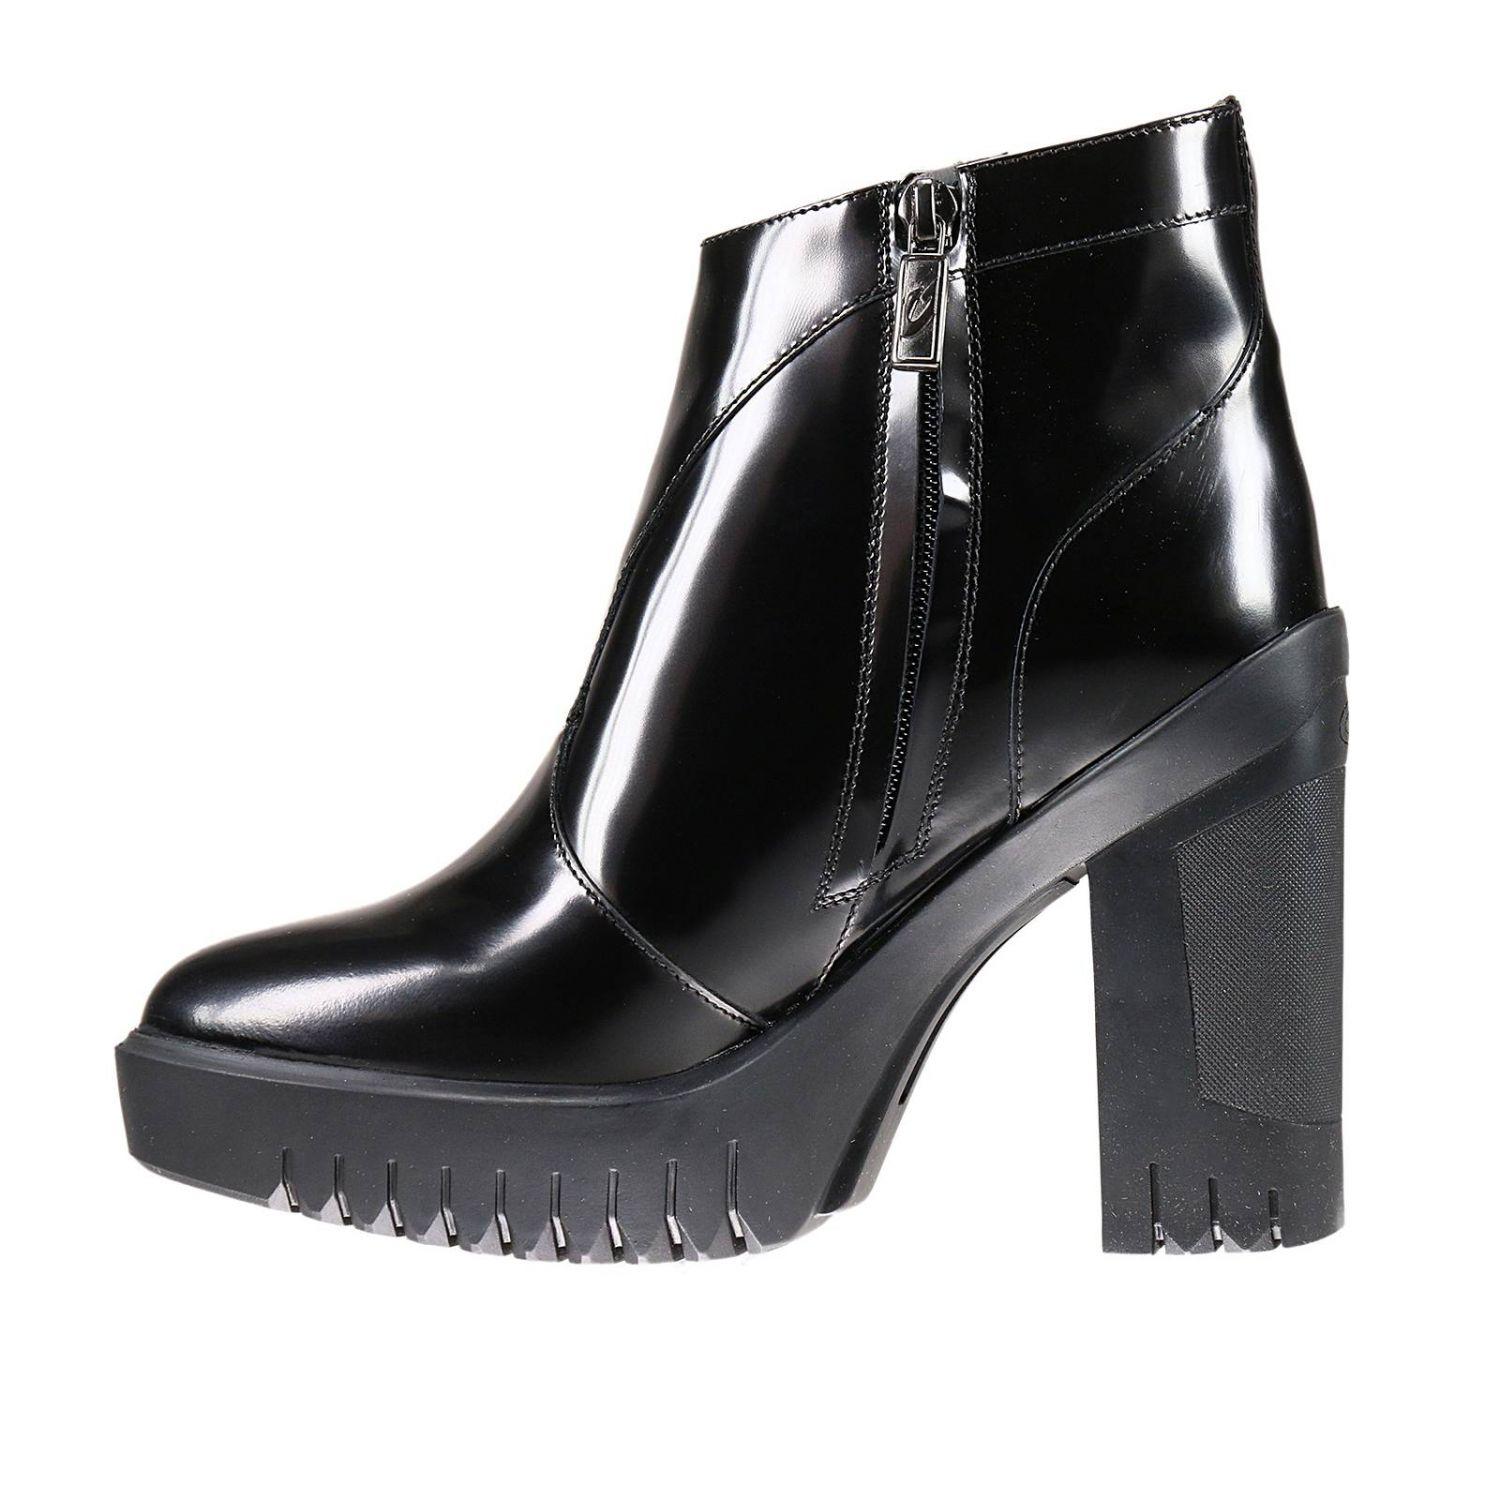 Lyst - Alberto Guardiani Heeled Booties Shoes Woman in Black